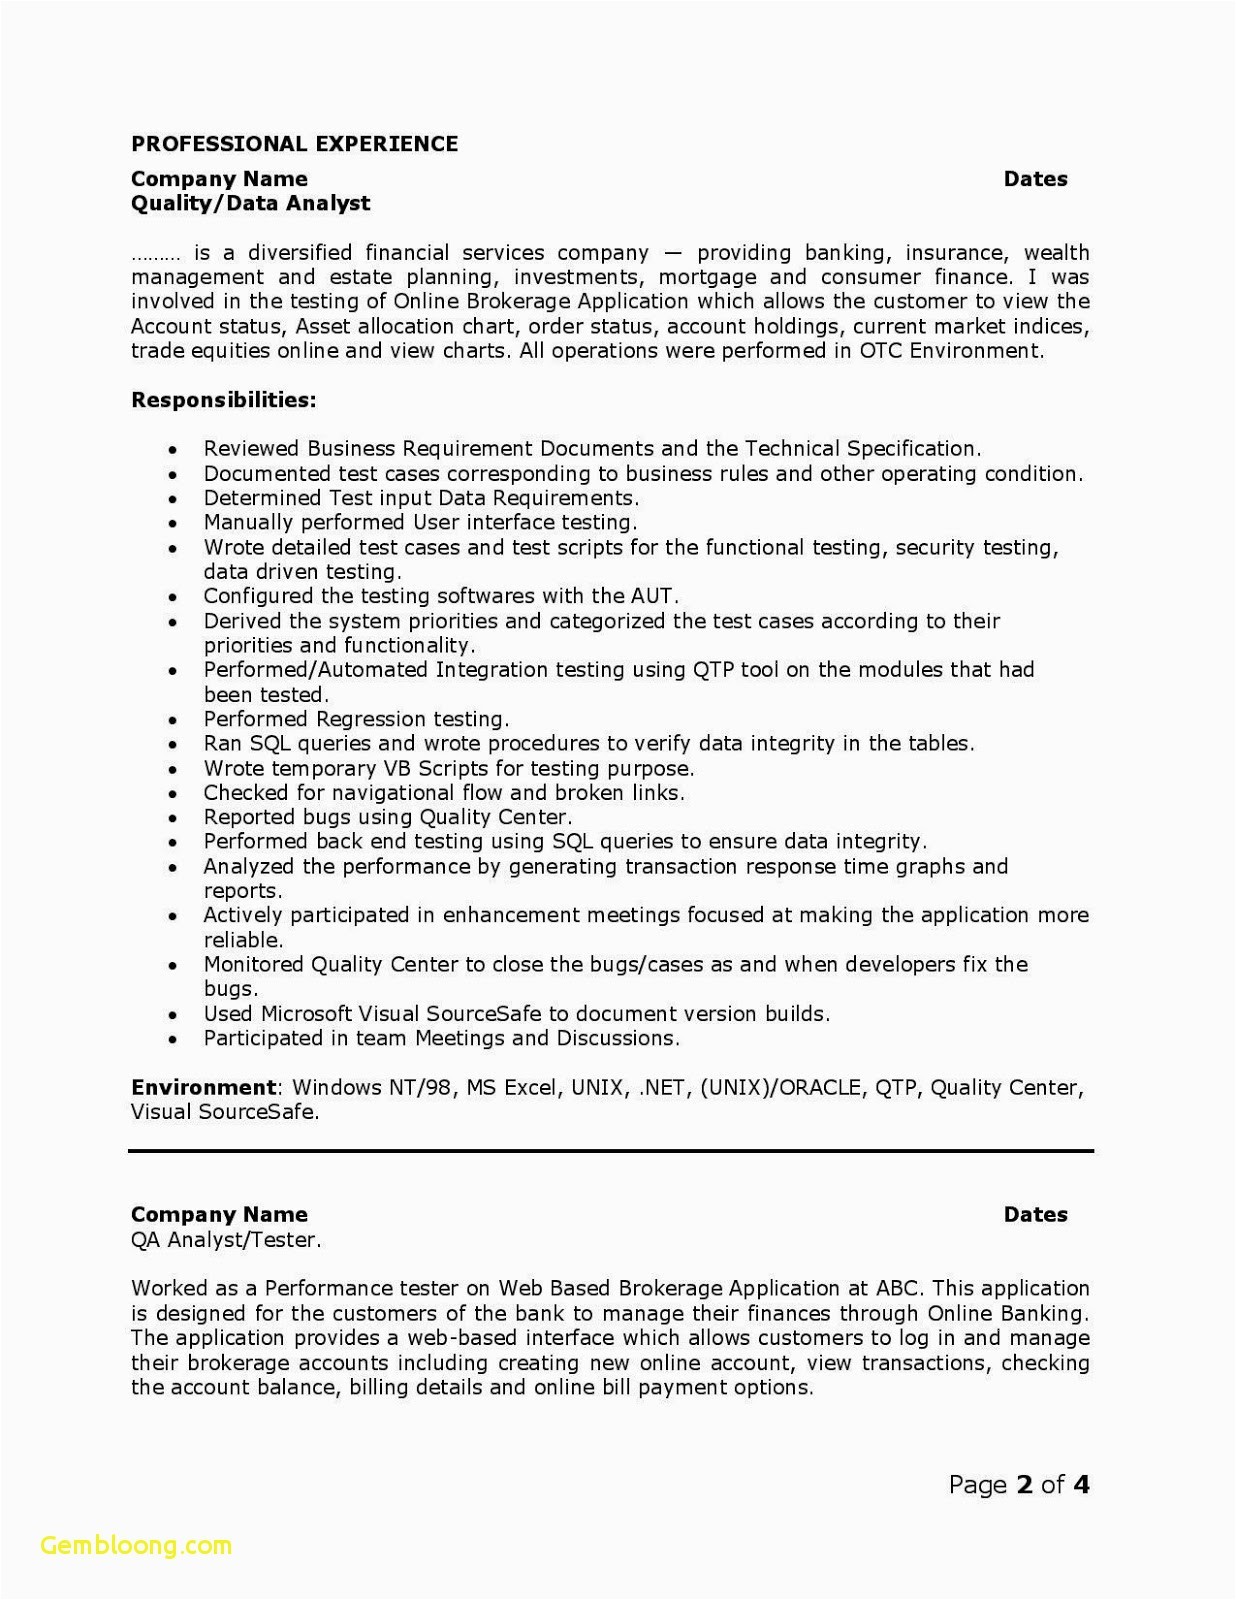 sample resume for application support analyst